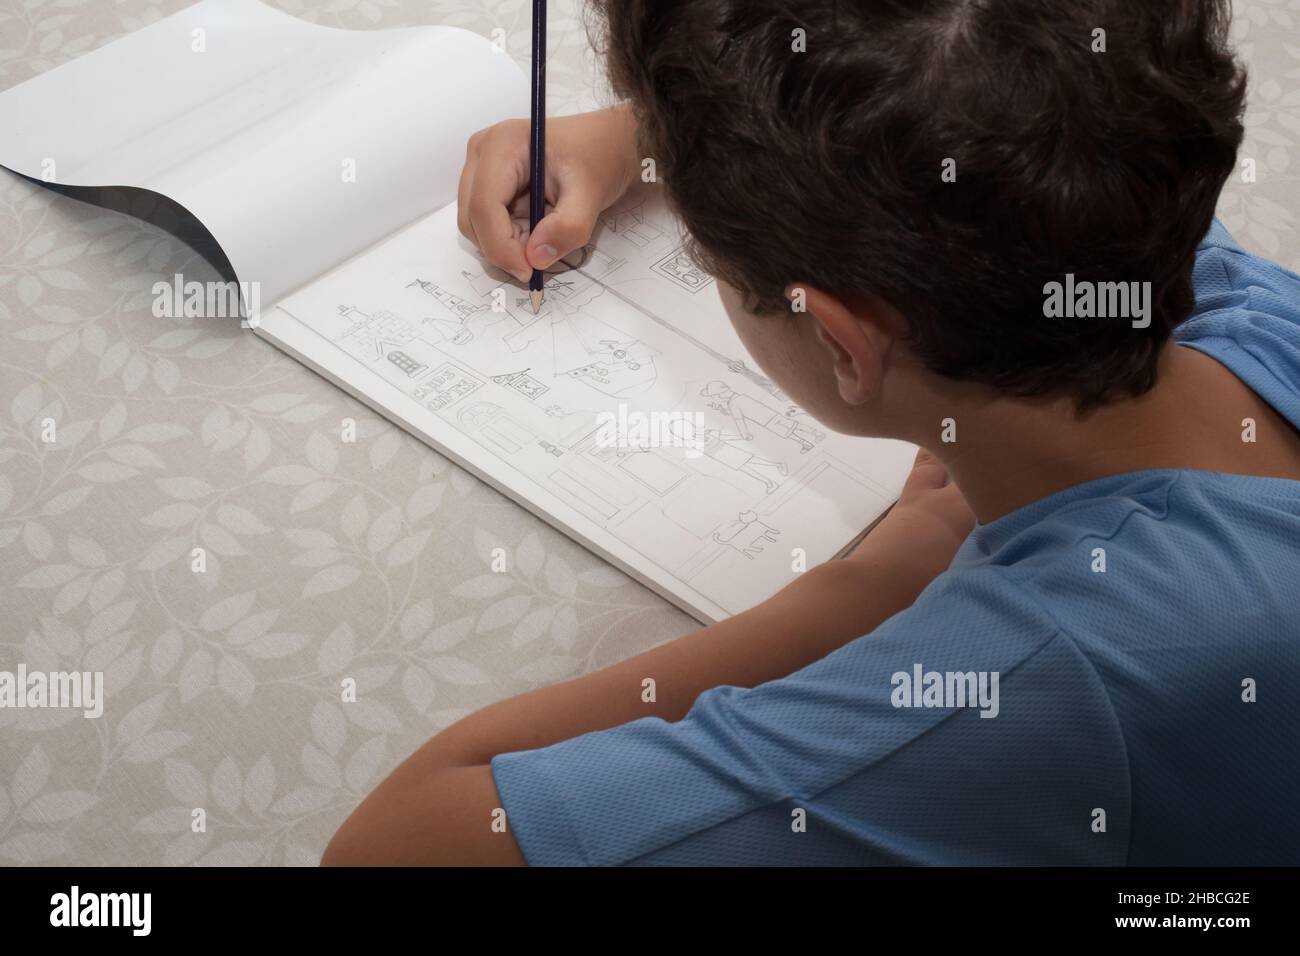 A boy sketching out a drawing of a seaside town, taken 13th of August 2020 in Wool, Dorset, UK Stock Photo